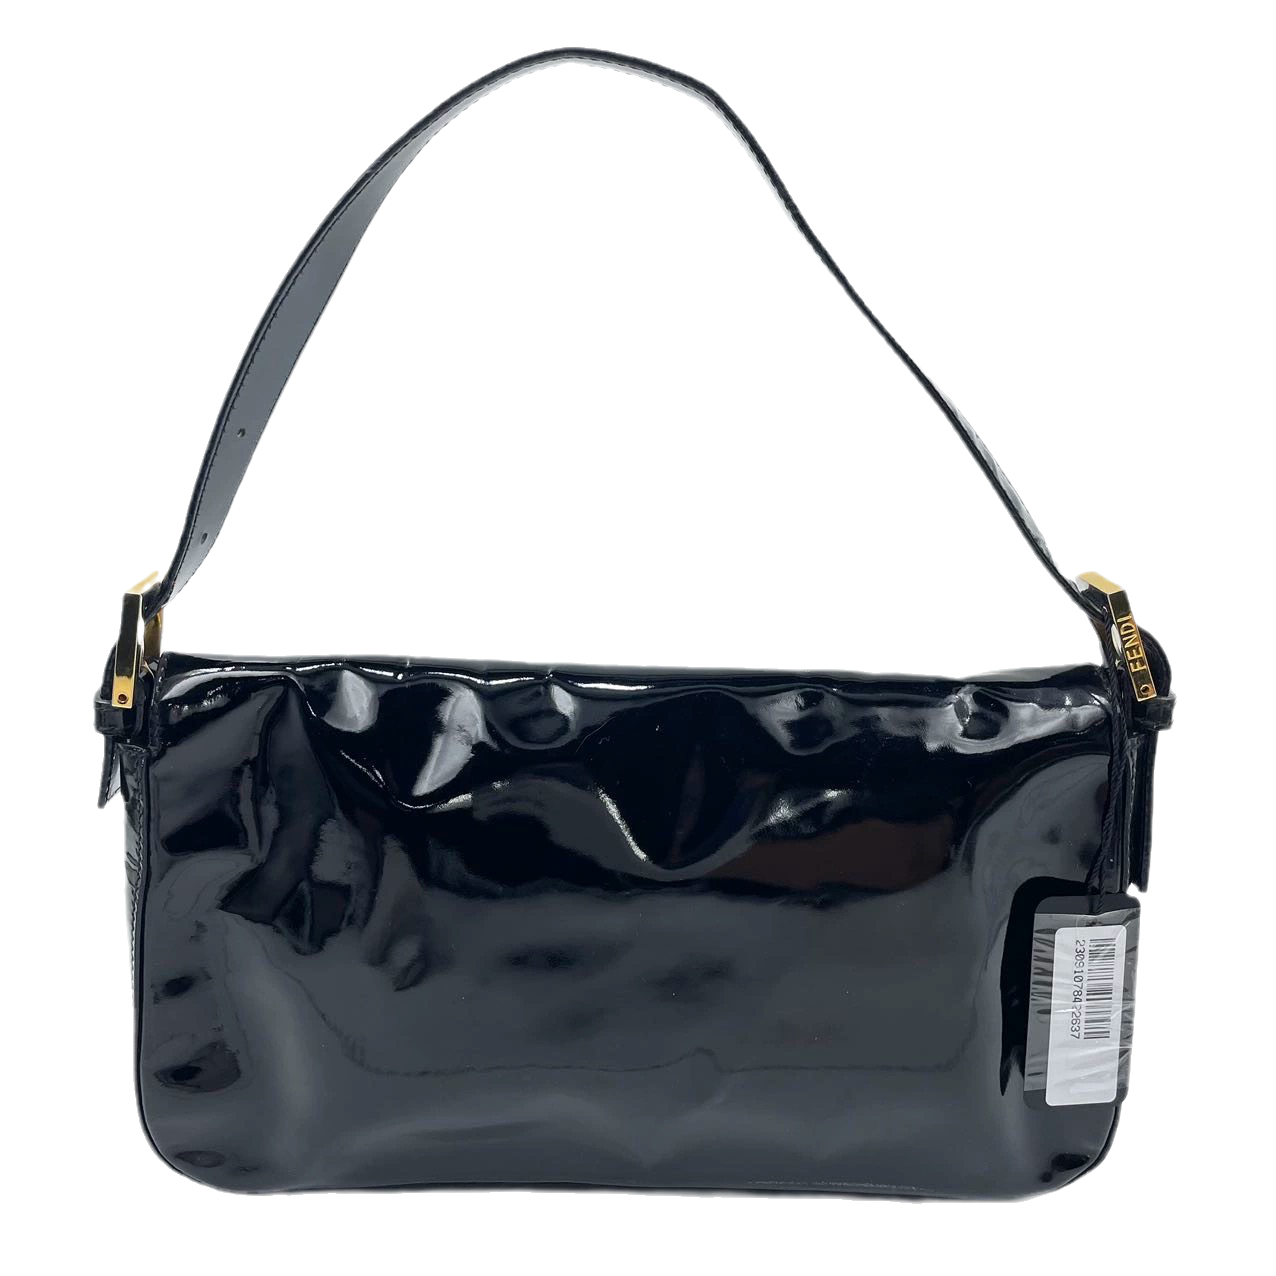 Sold Fendi Baguette Black Patent Leather with Gold Hardware